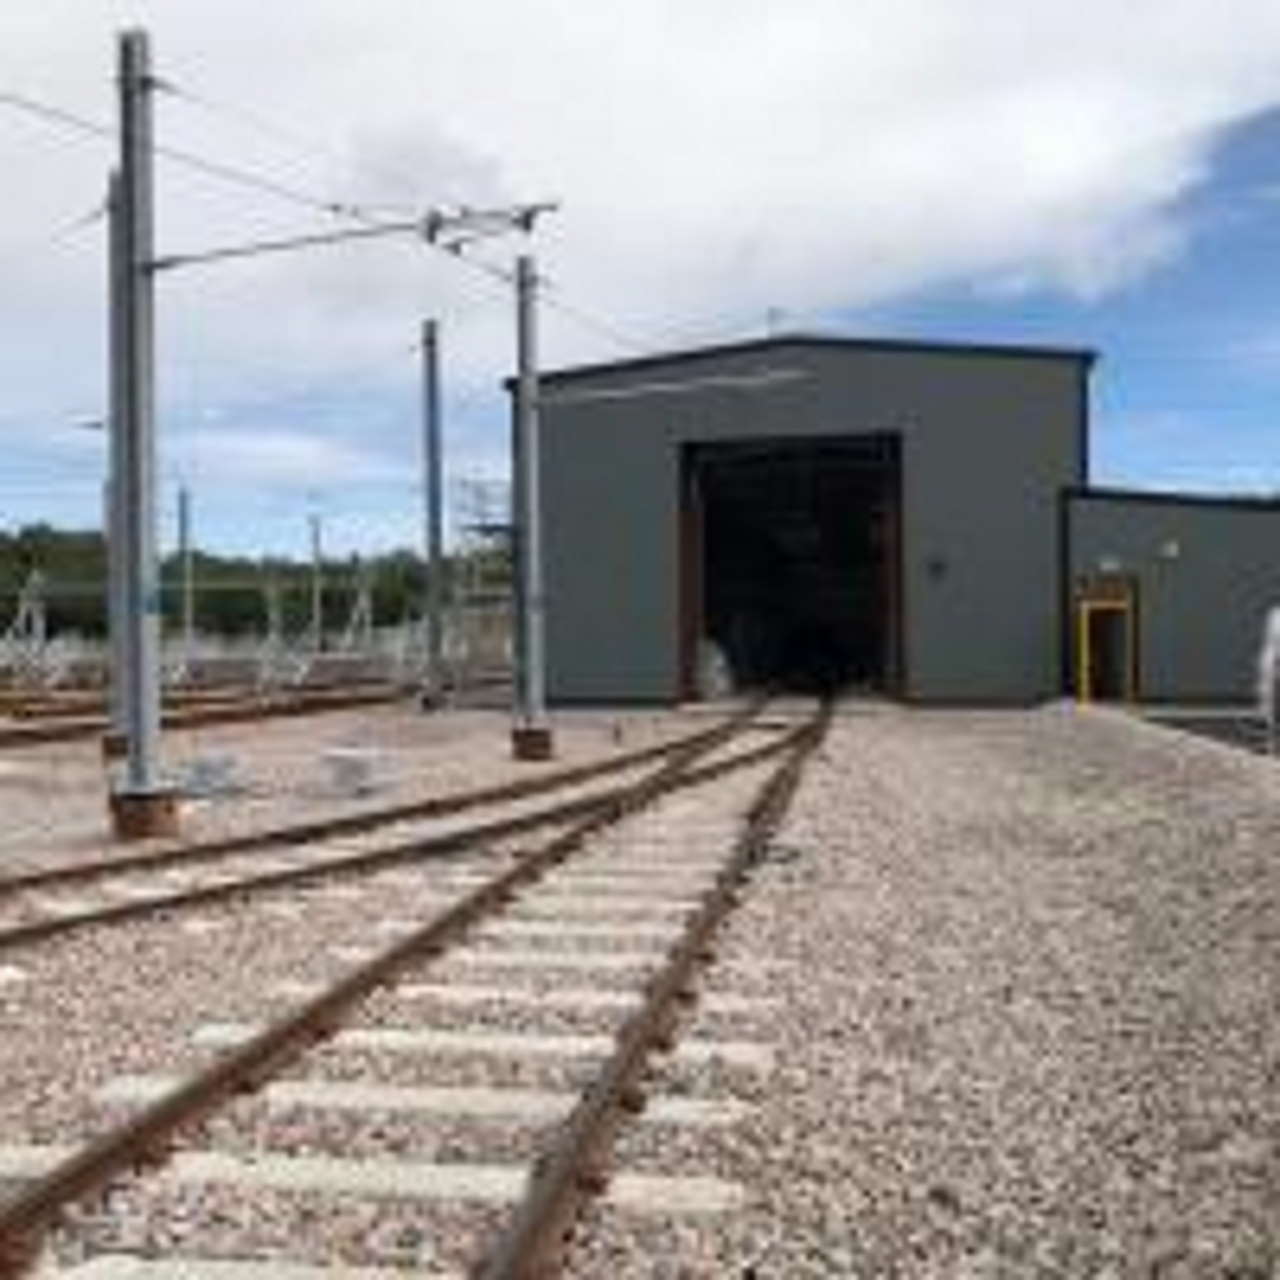 Tyne and Wear Metro depot approaches completion